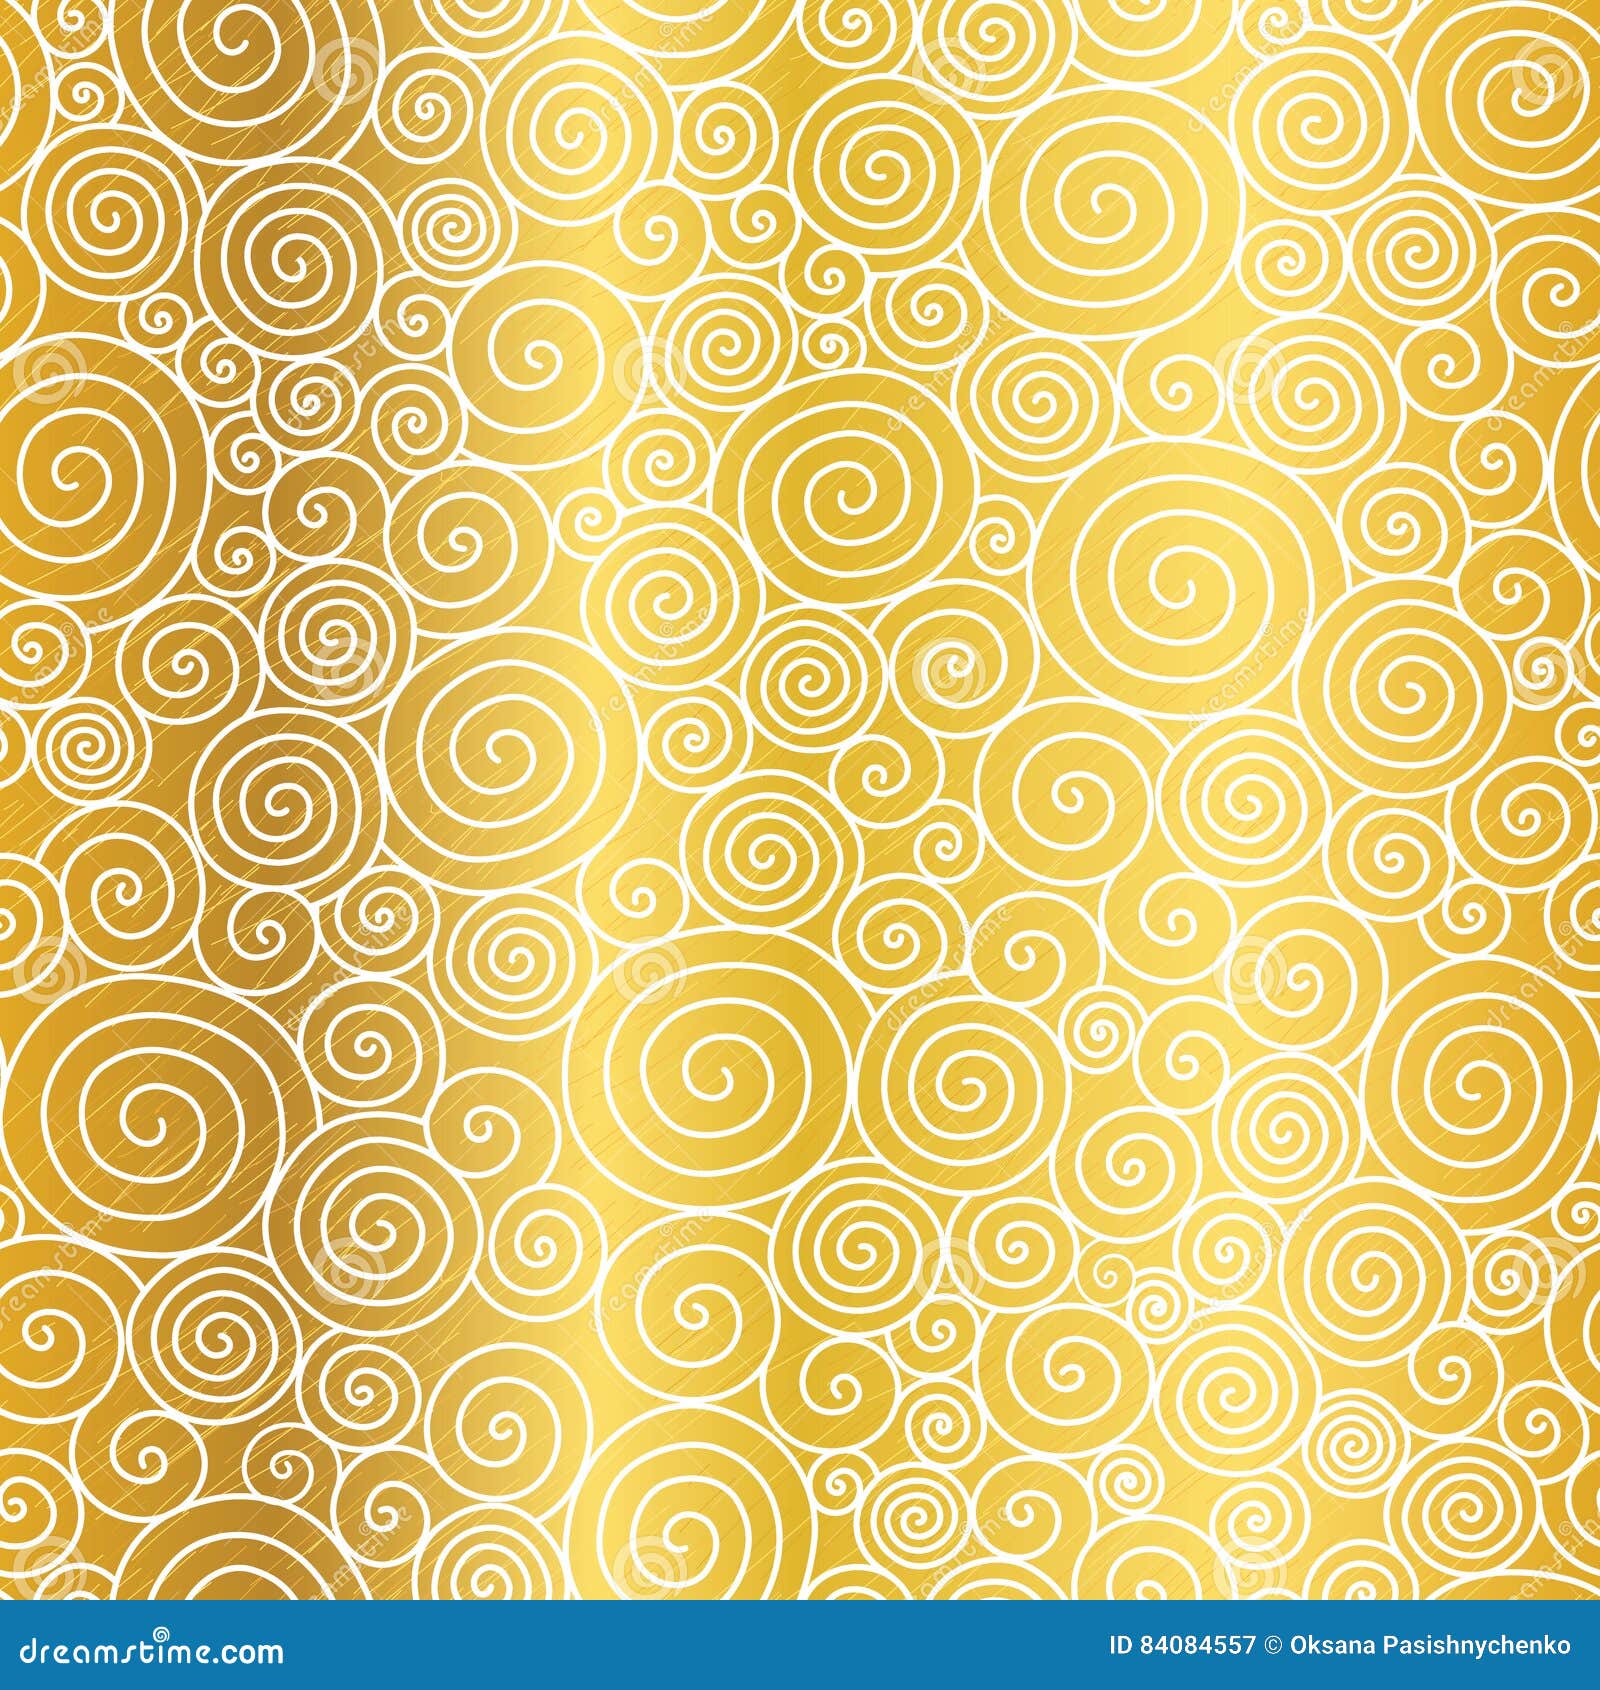 Vector Golden Abstract Swirls Seamless Pattern Background. Great for  Elegant Gold Texture Fabric, Cards, Wedding Stock Vector - Illustration of  packaging, metal: 84084557